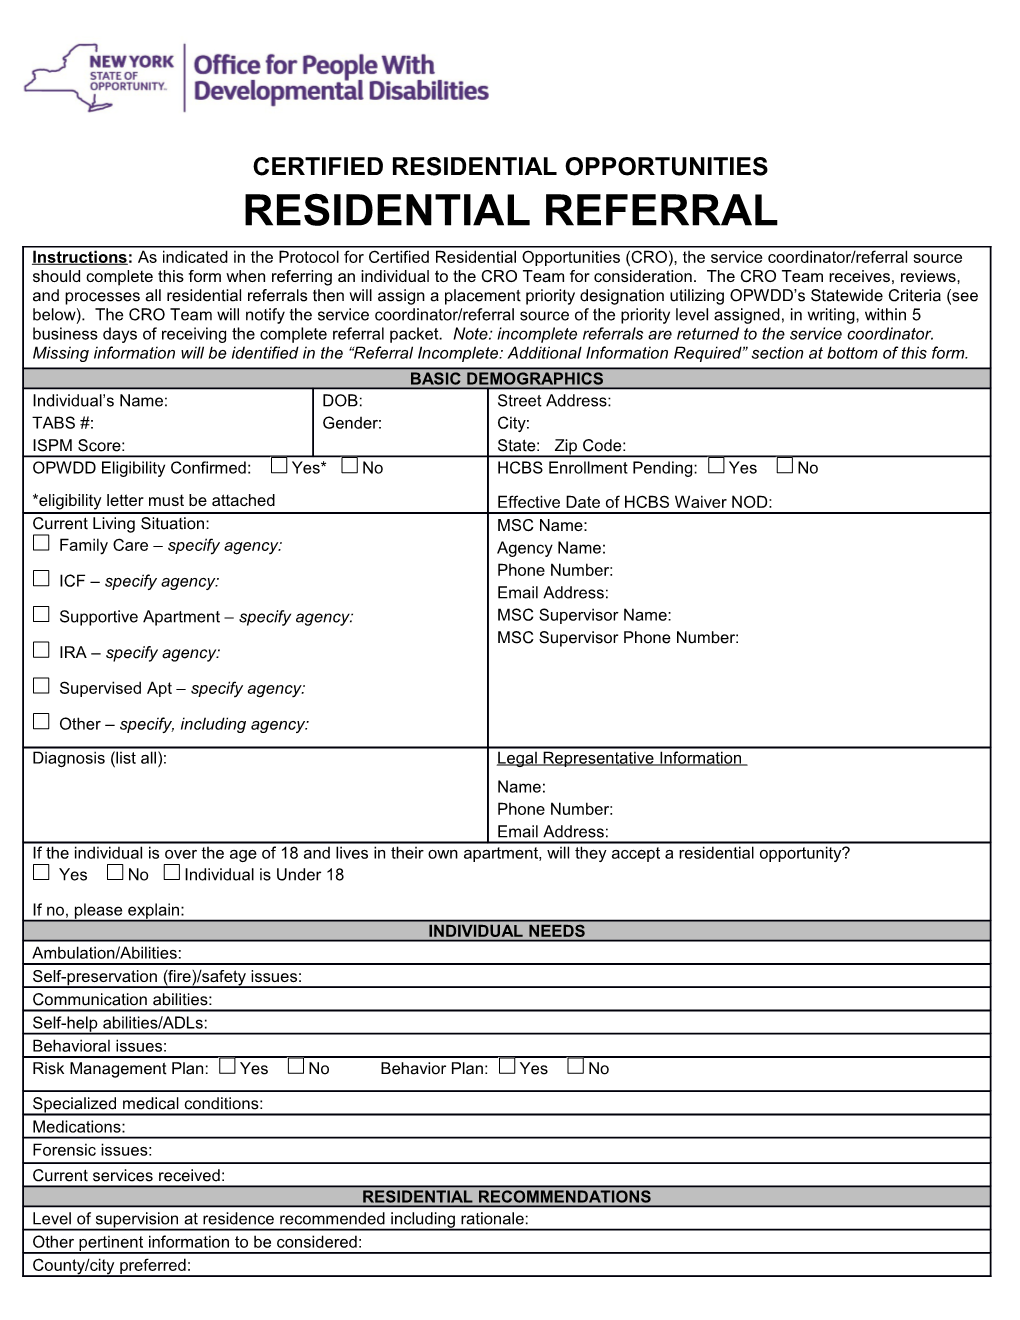 Region 2- Broome Residential Opportunity Approval Form